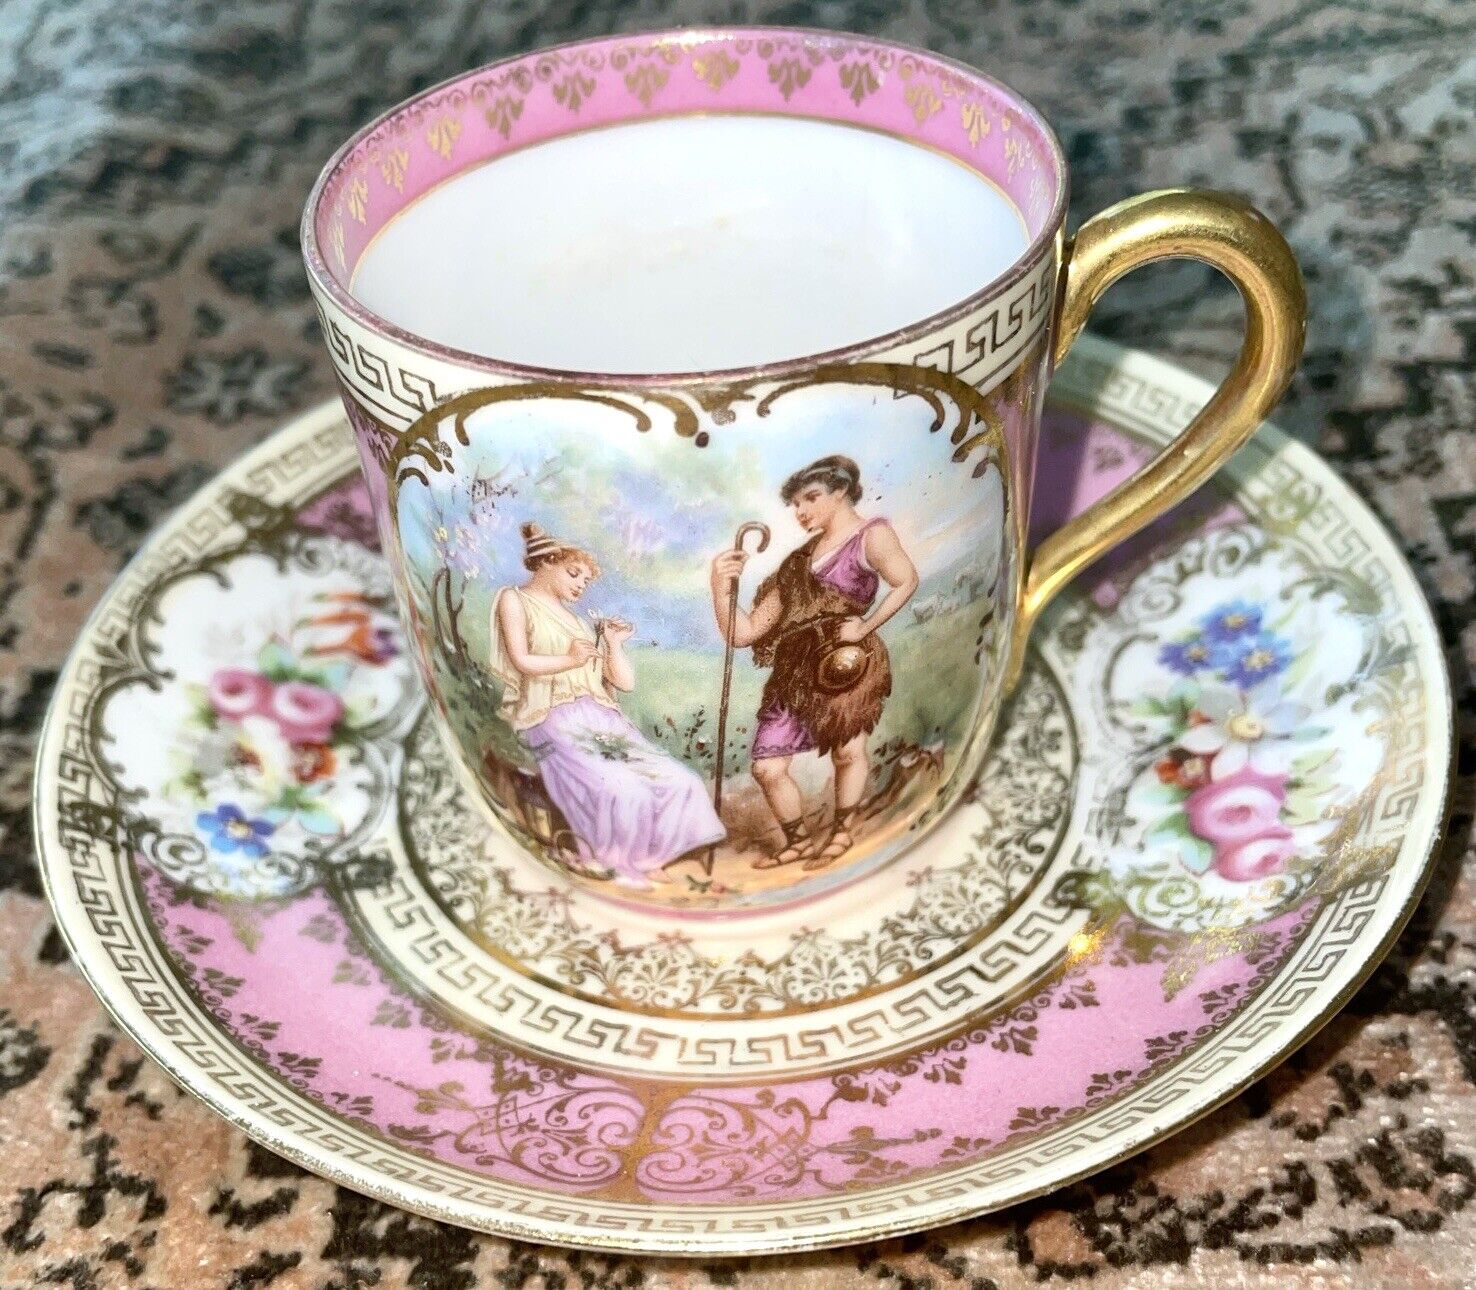 IMPERIAL CROWN CHINA AUSTRIA TEA CUP SAUCER Pink Gold Floral Demitasse